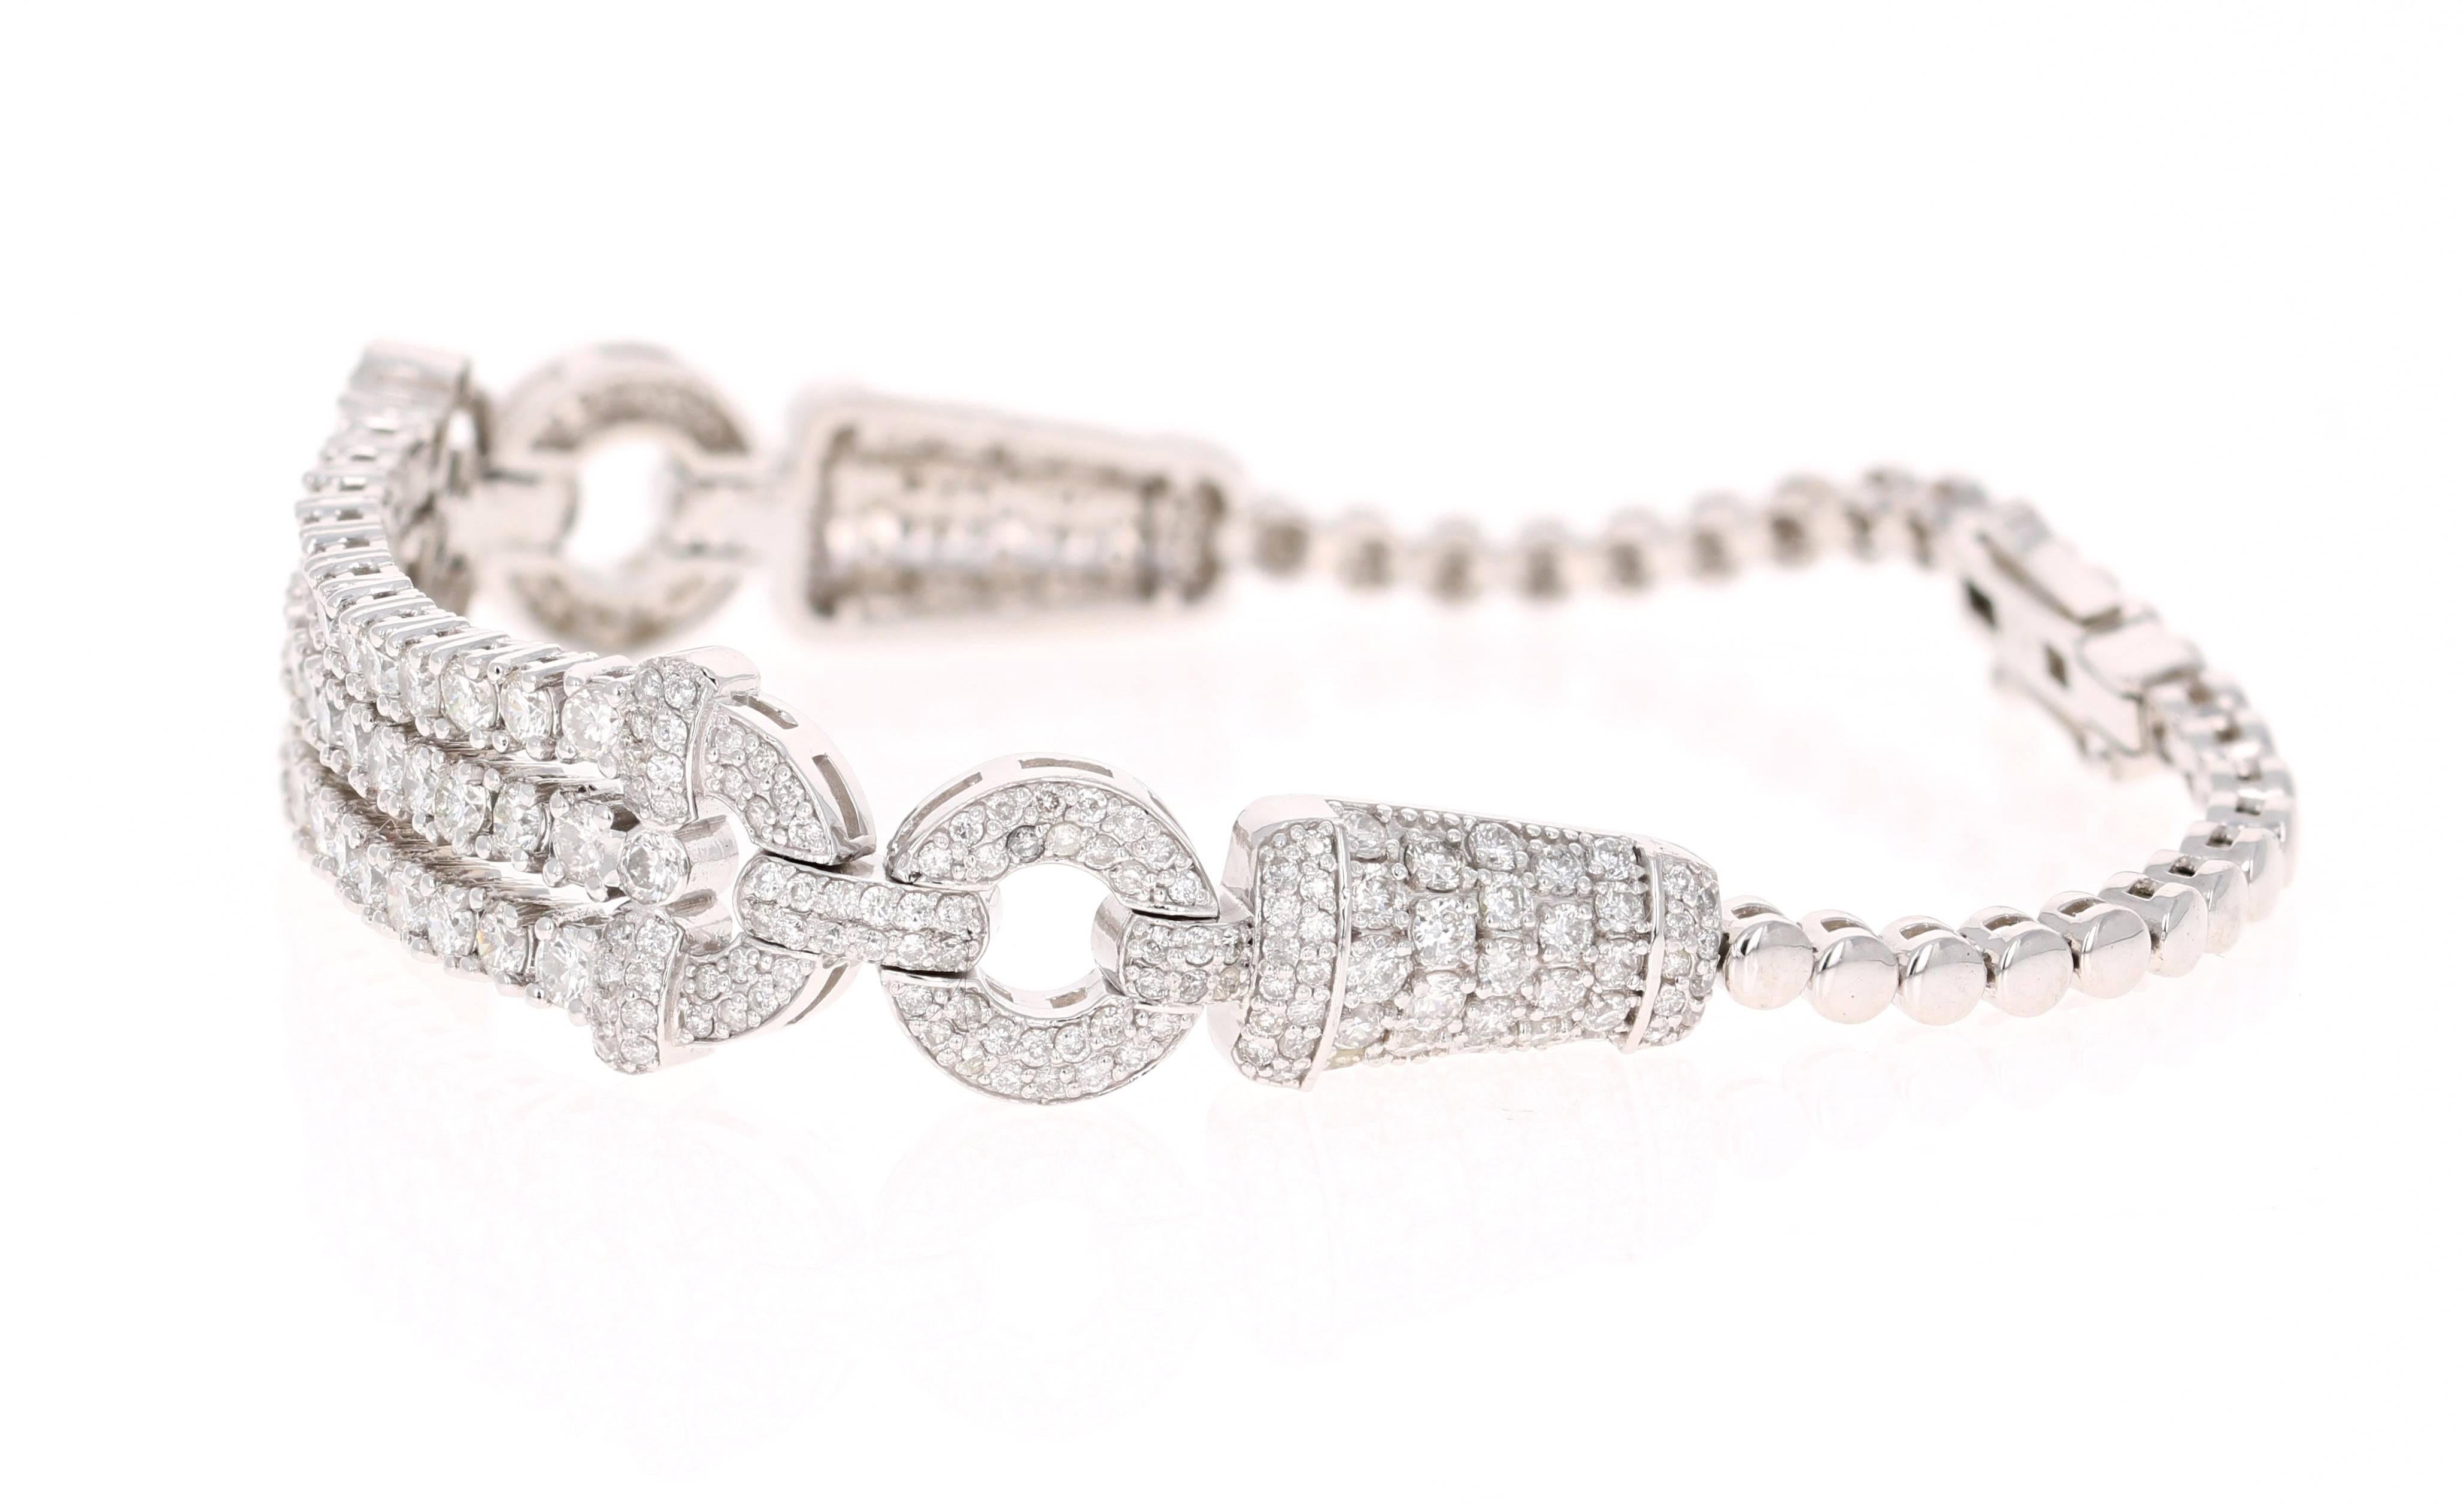 Stunning 3.91 Carat Diamond White Gold Art Deco Bracelet.  This gorgeous piece has 275 Round Cut Diamonds that weigh a total of 3.91 carats. It is casted in 14K and weighs approximately 18.0 grams. 

The bracelet is 7-inches long and has a very